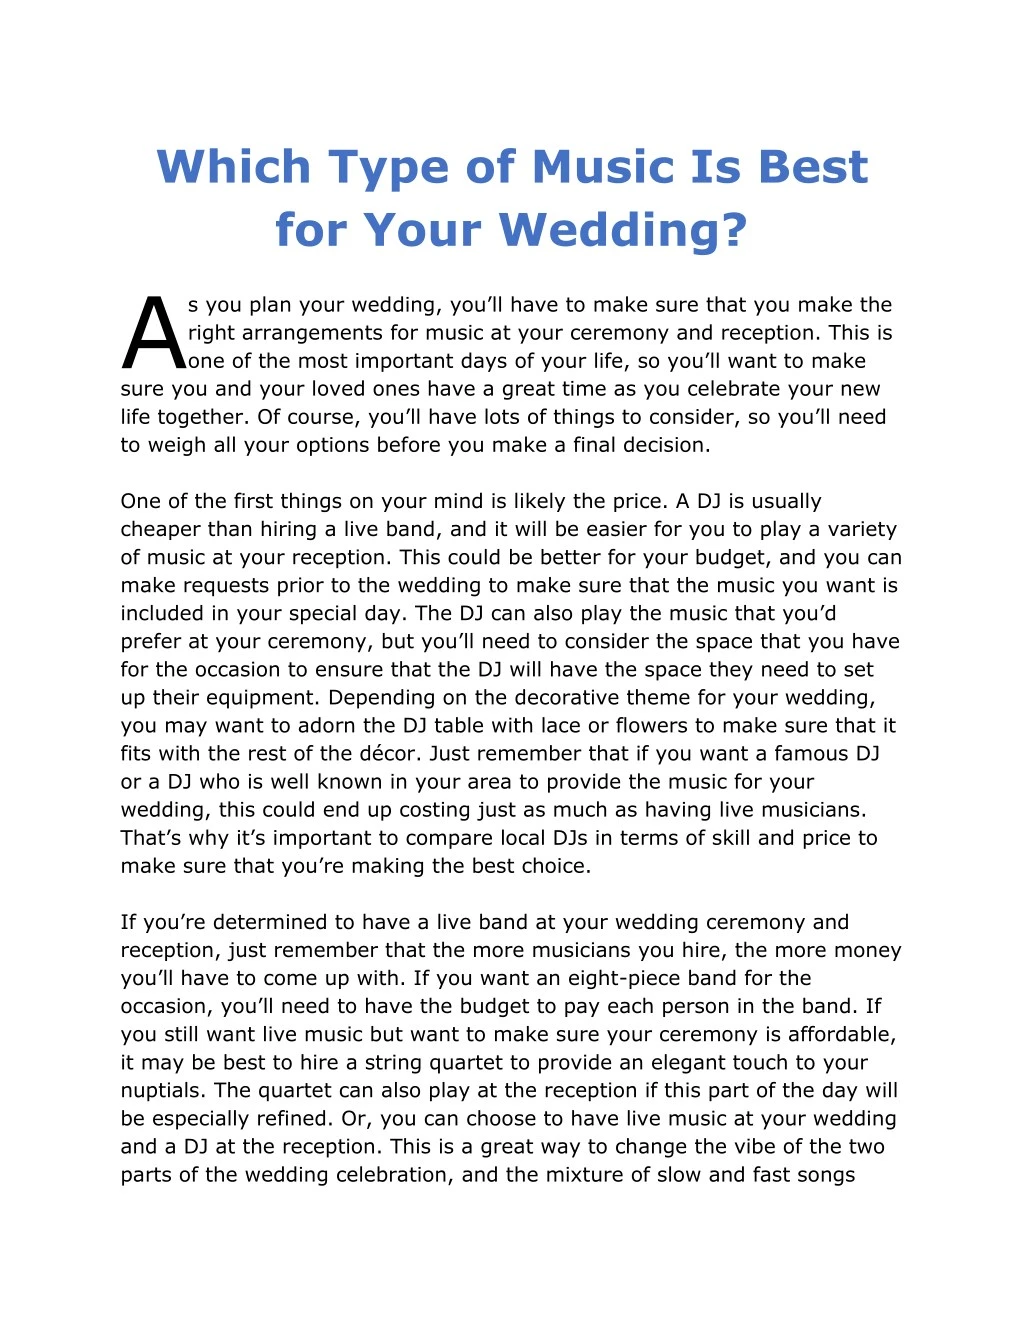 which type of music is best for your wedding a